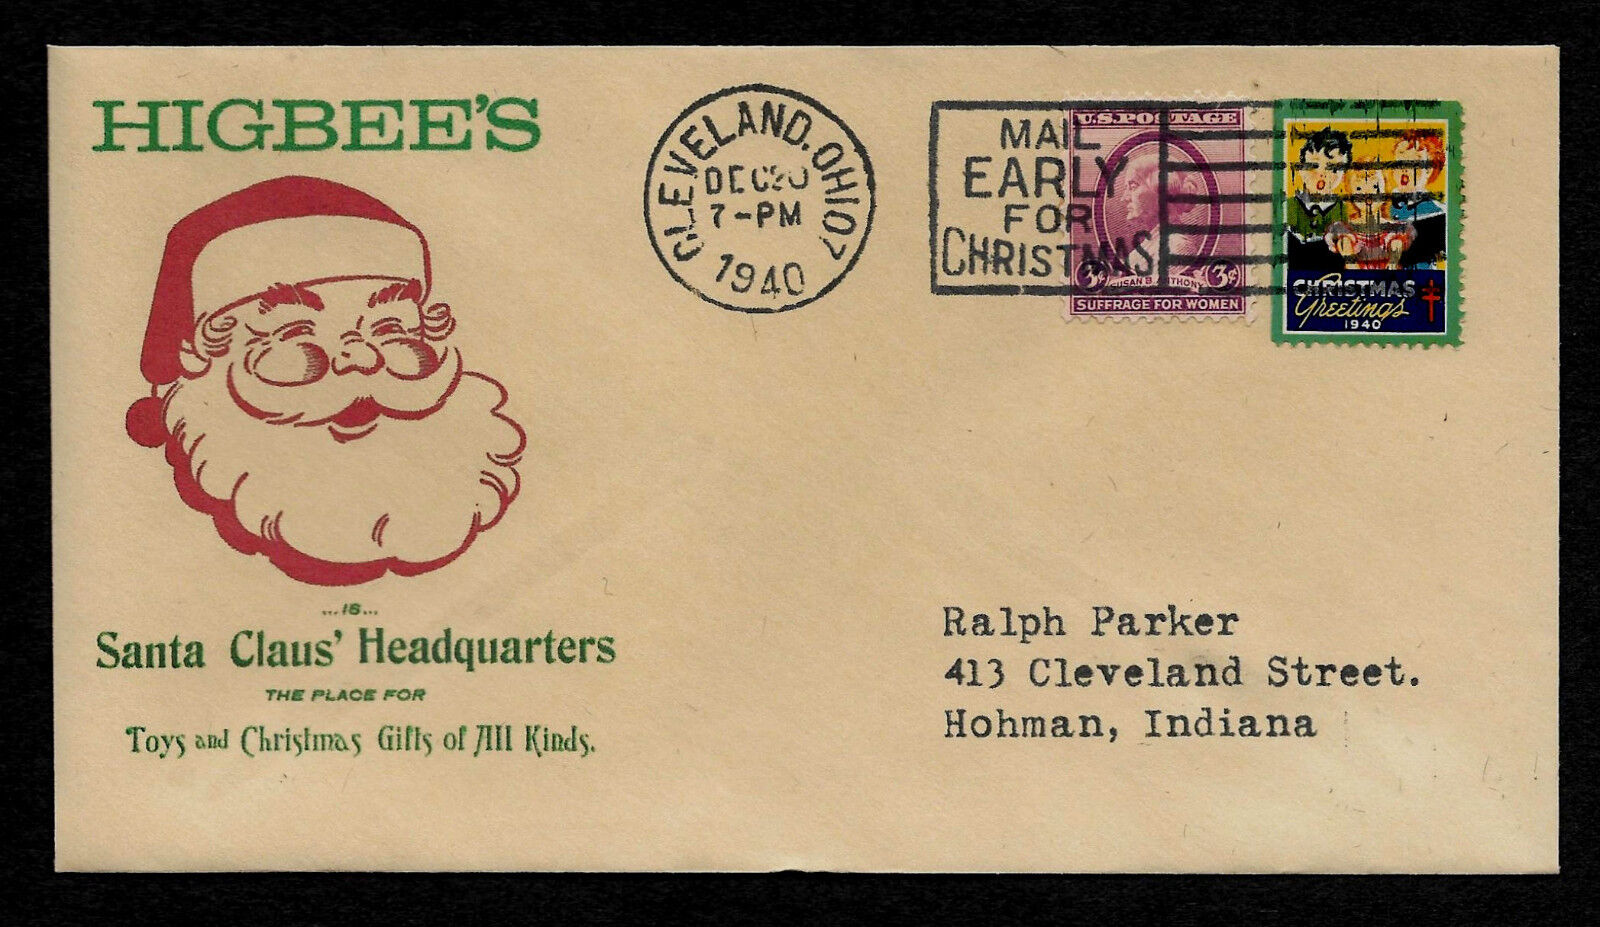 1982 A Xmas Story Envelope Addressed to Ralph Parker Higbees Dept Store *XS1026